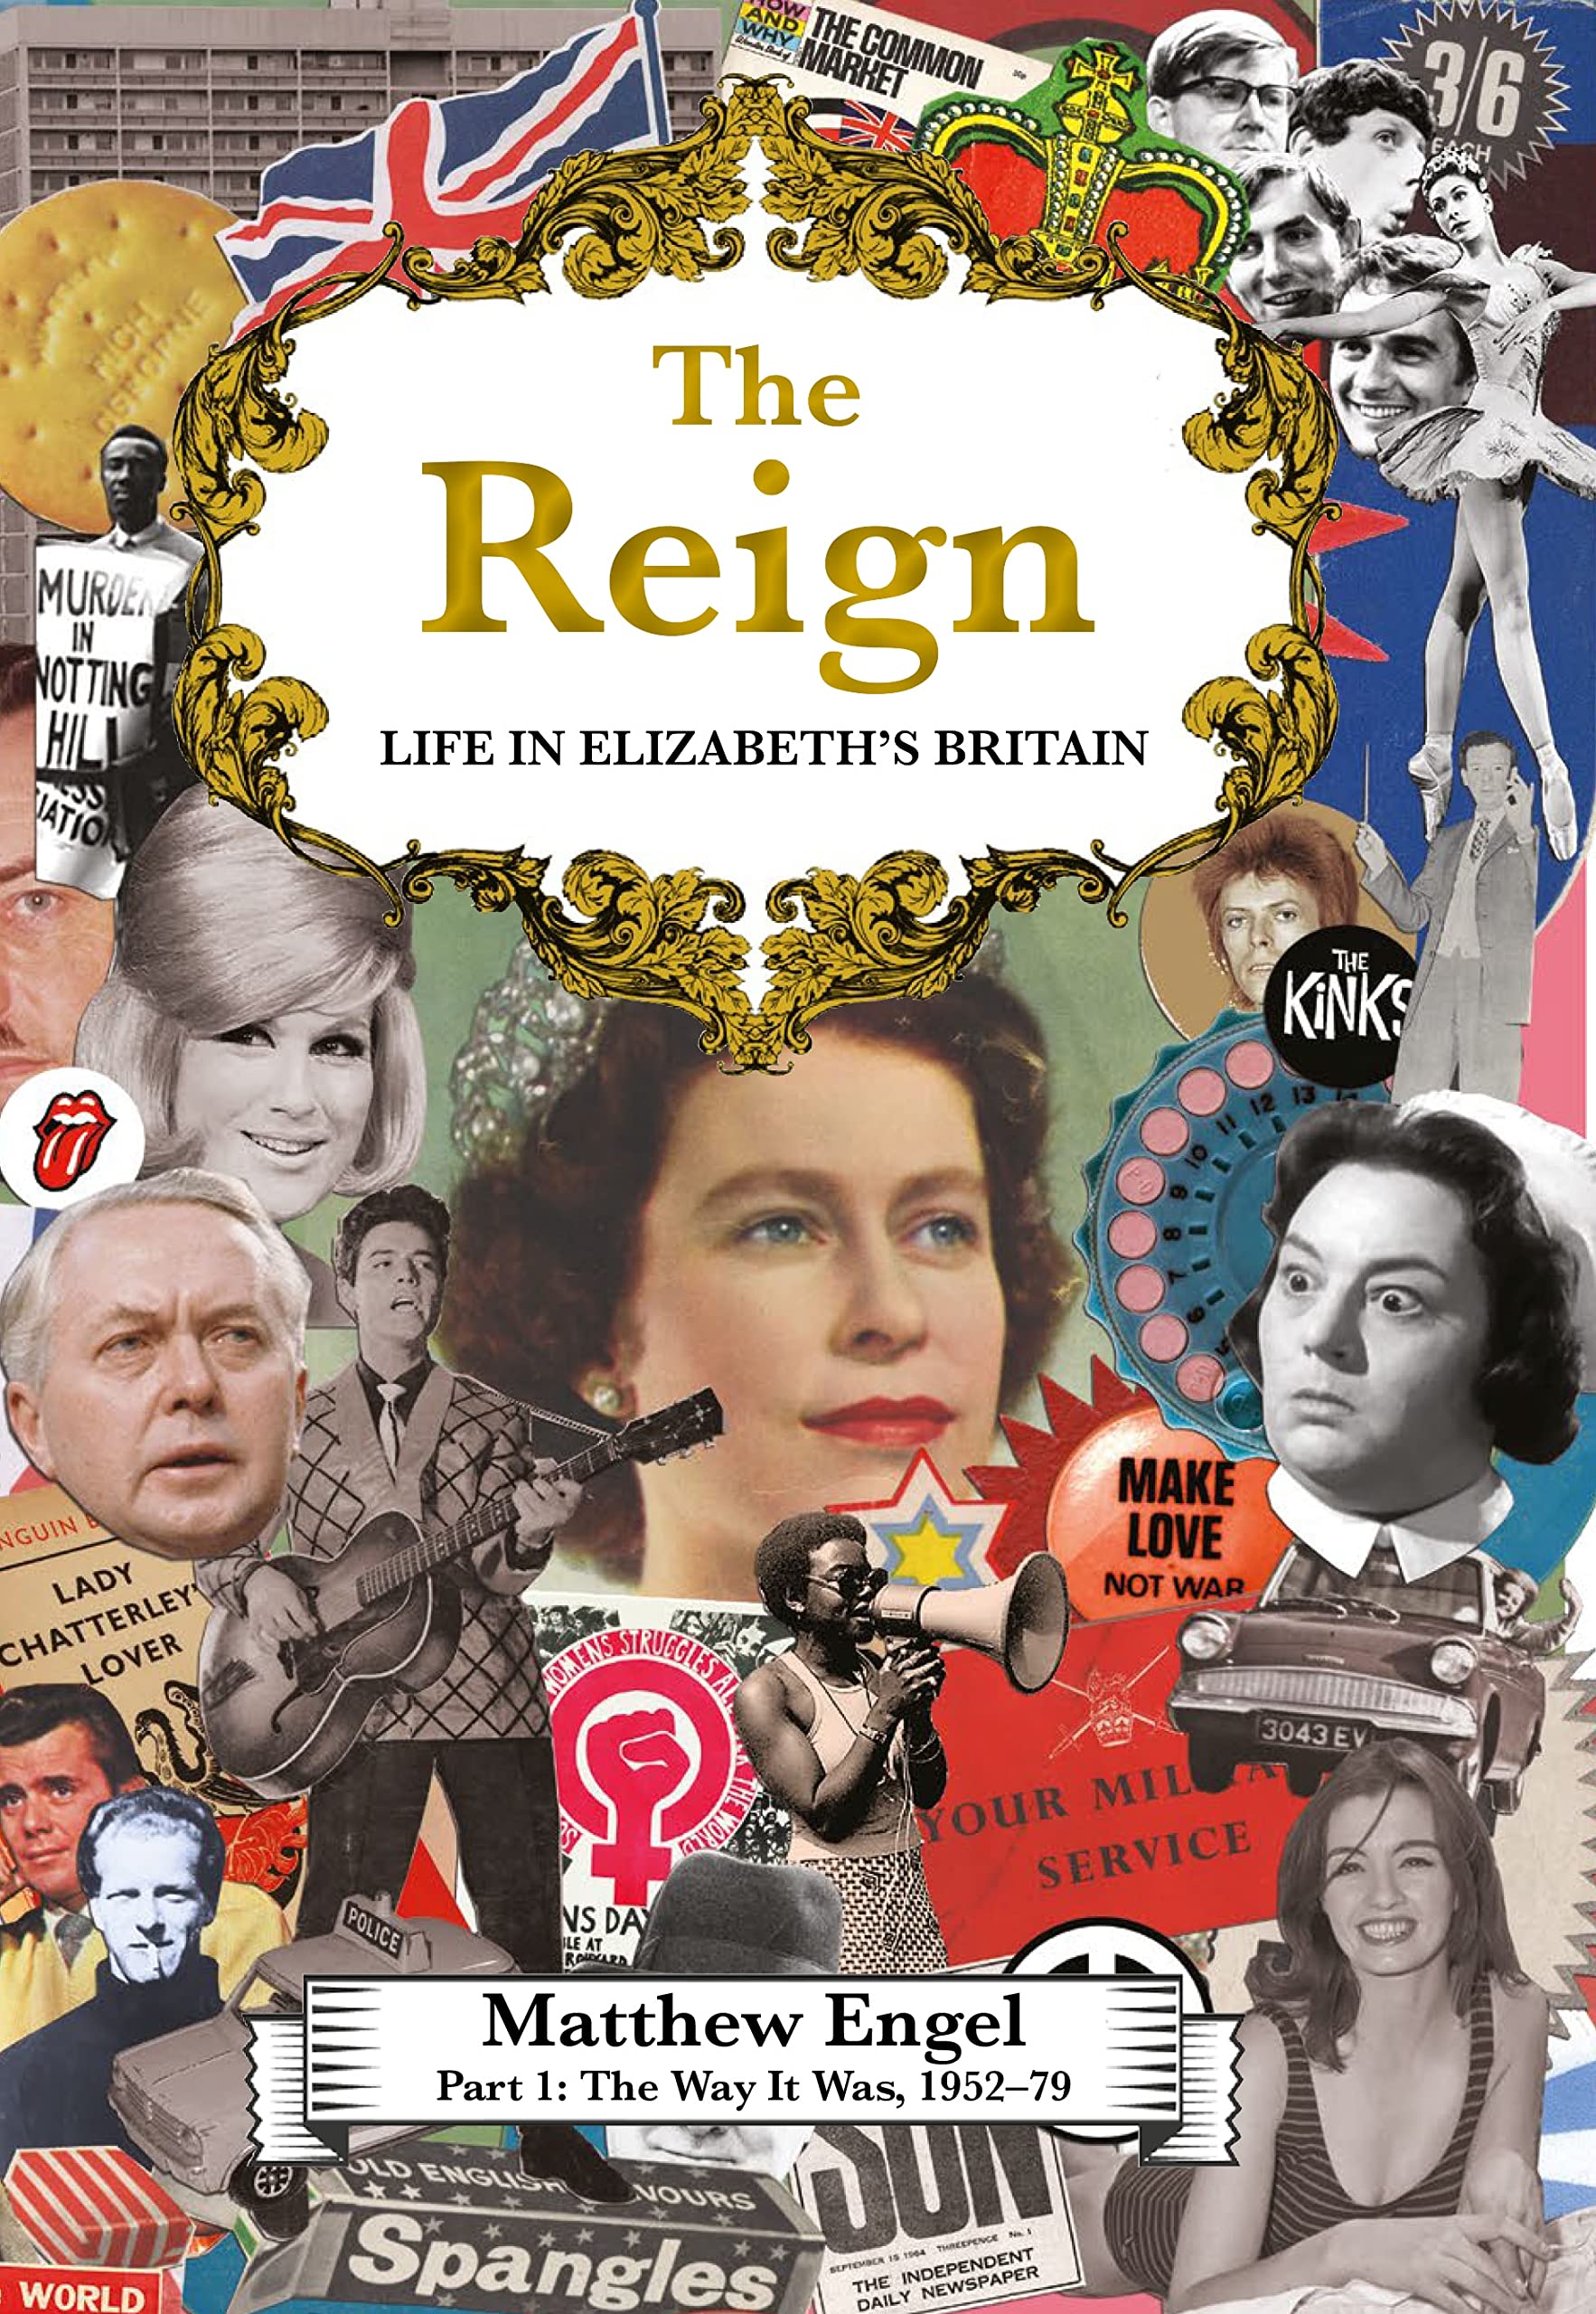 "Cover of The Reign featuring several images of Queen Elizabeth II from 1952 to 1979"